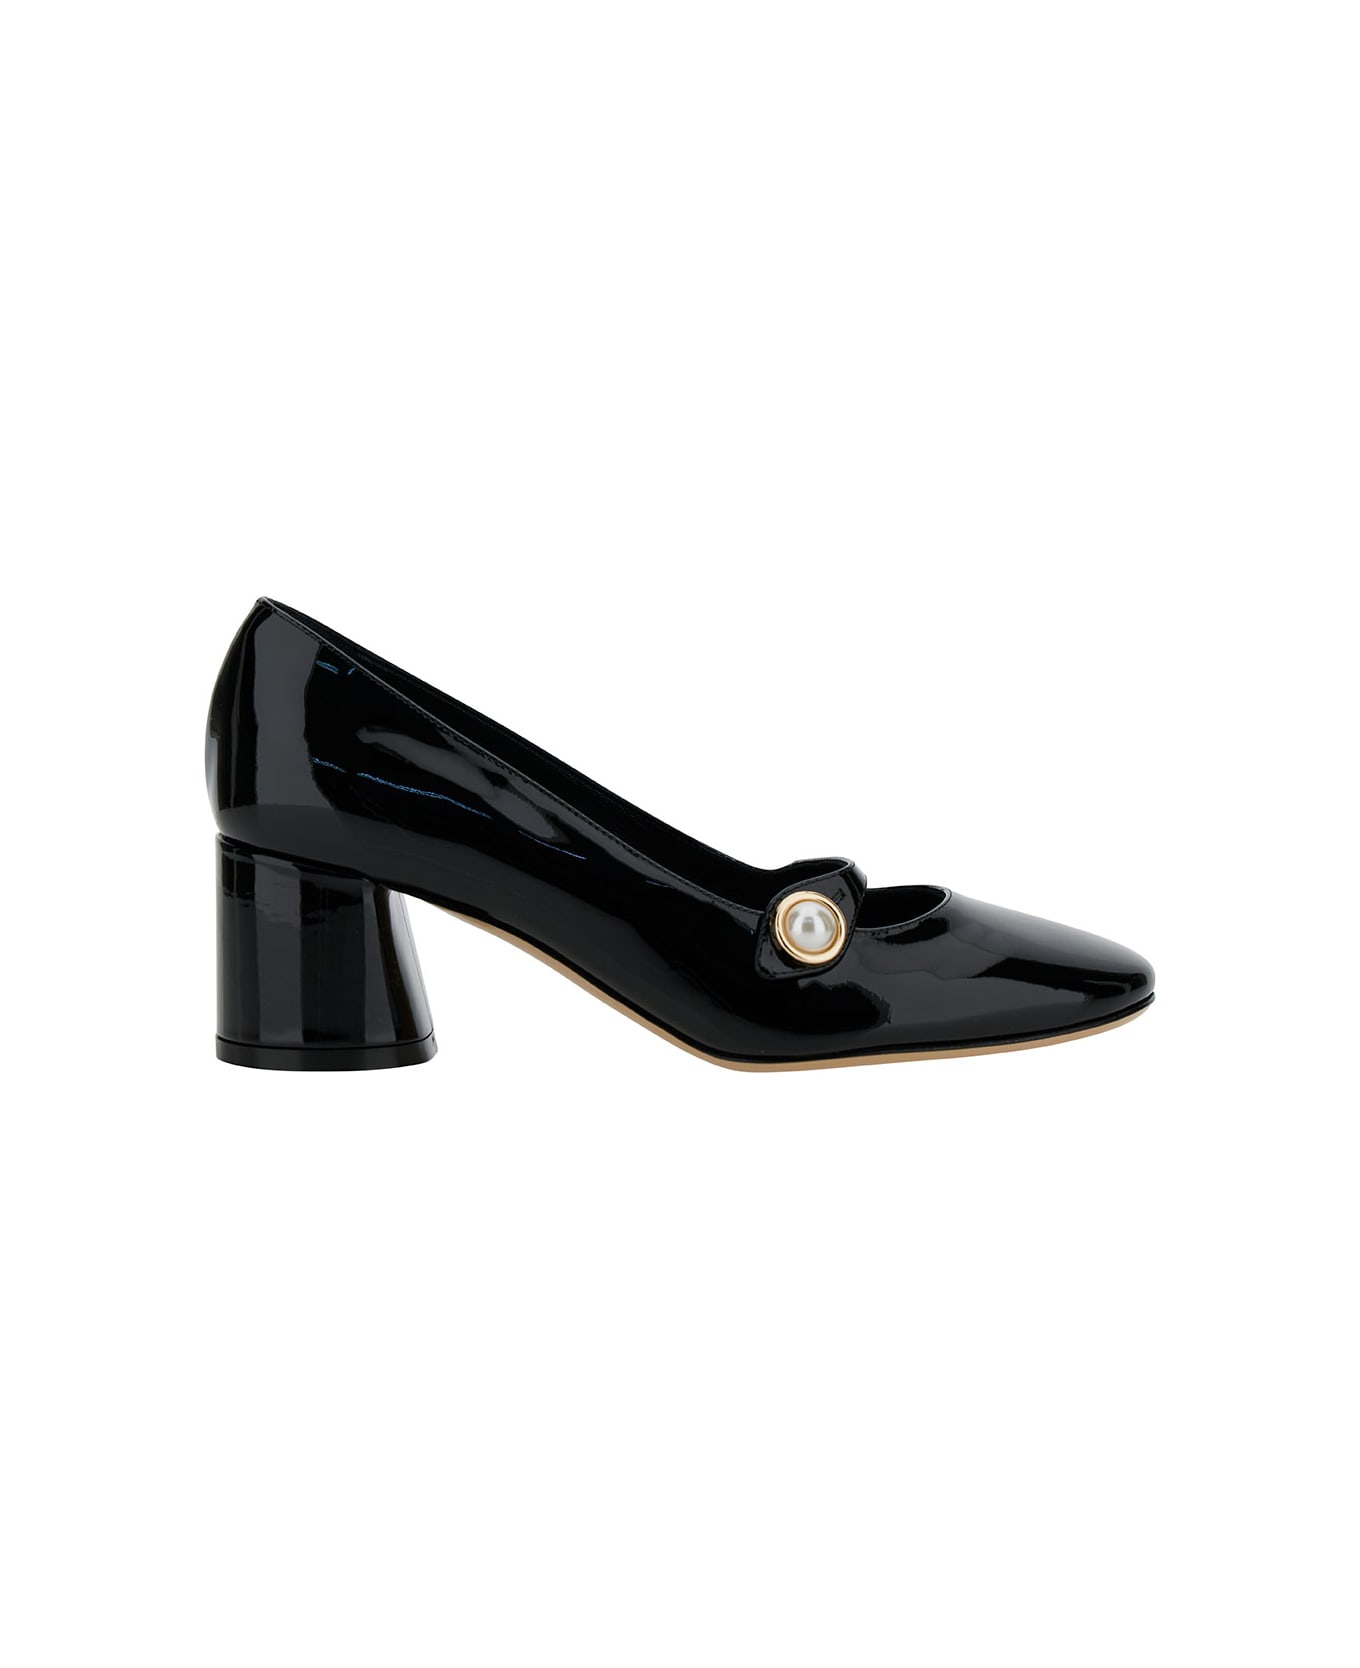 Casadei 'emily' Black Pointed Pumps With Pearl Detail In Patent Leather Woman - Black